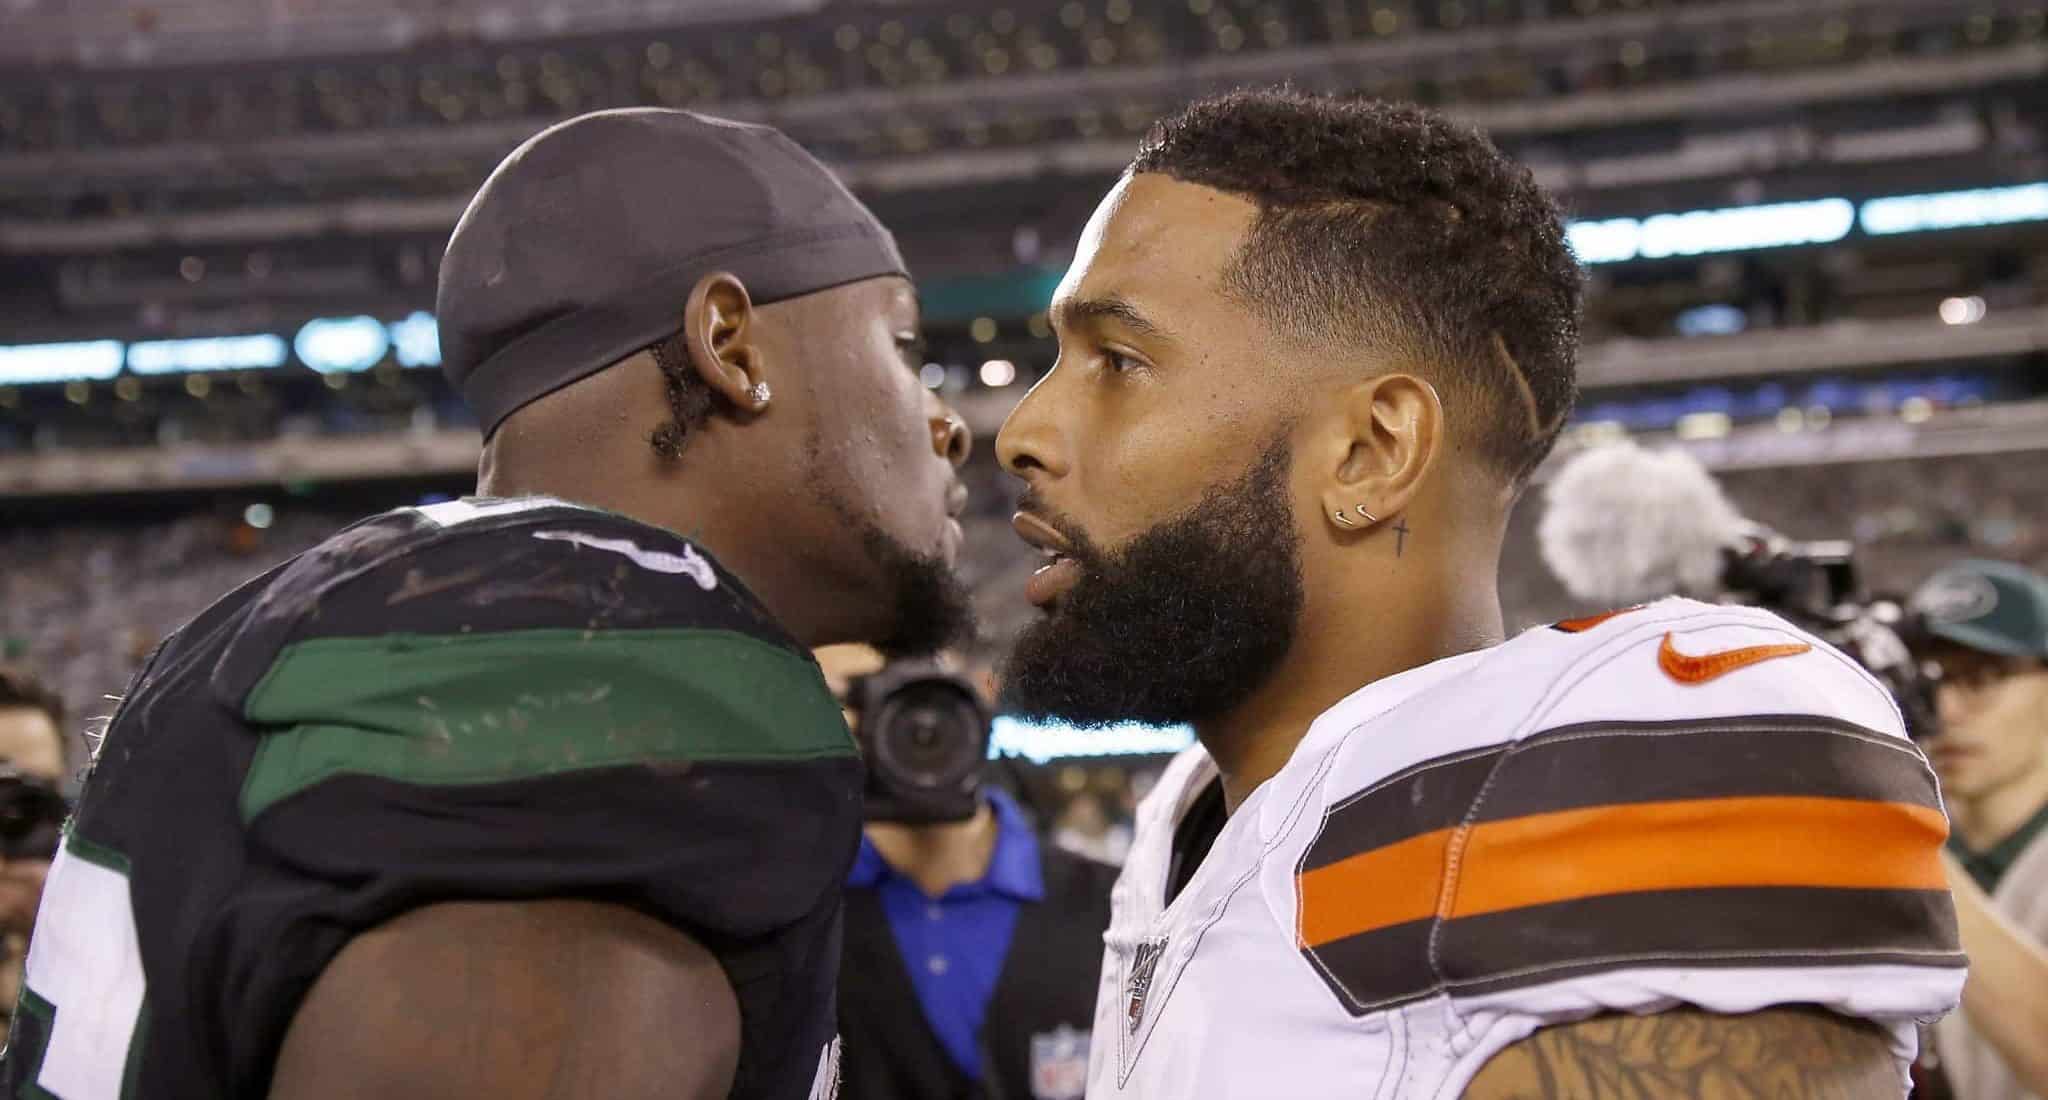 EAST RUTHERFORD, NEW JERSEY - SEPTEMBER 16: Le'Veon Bell #26 of the New York Jets and Odell Beckham Jr. #13 of the Cleveland Browns talk after the game at MetLife Stadium on September 16, 2019 in East Rutherford, New Jersey.